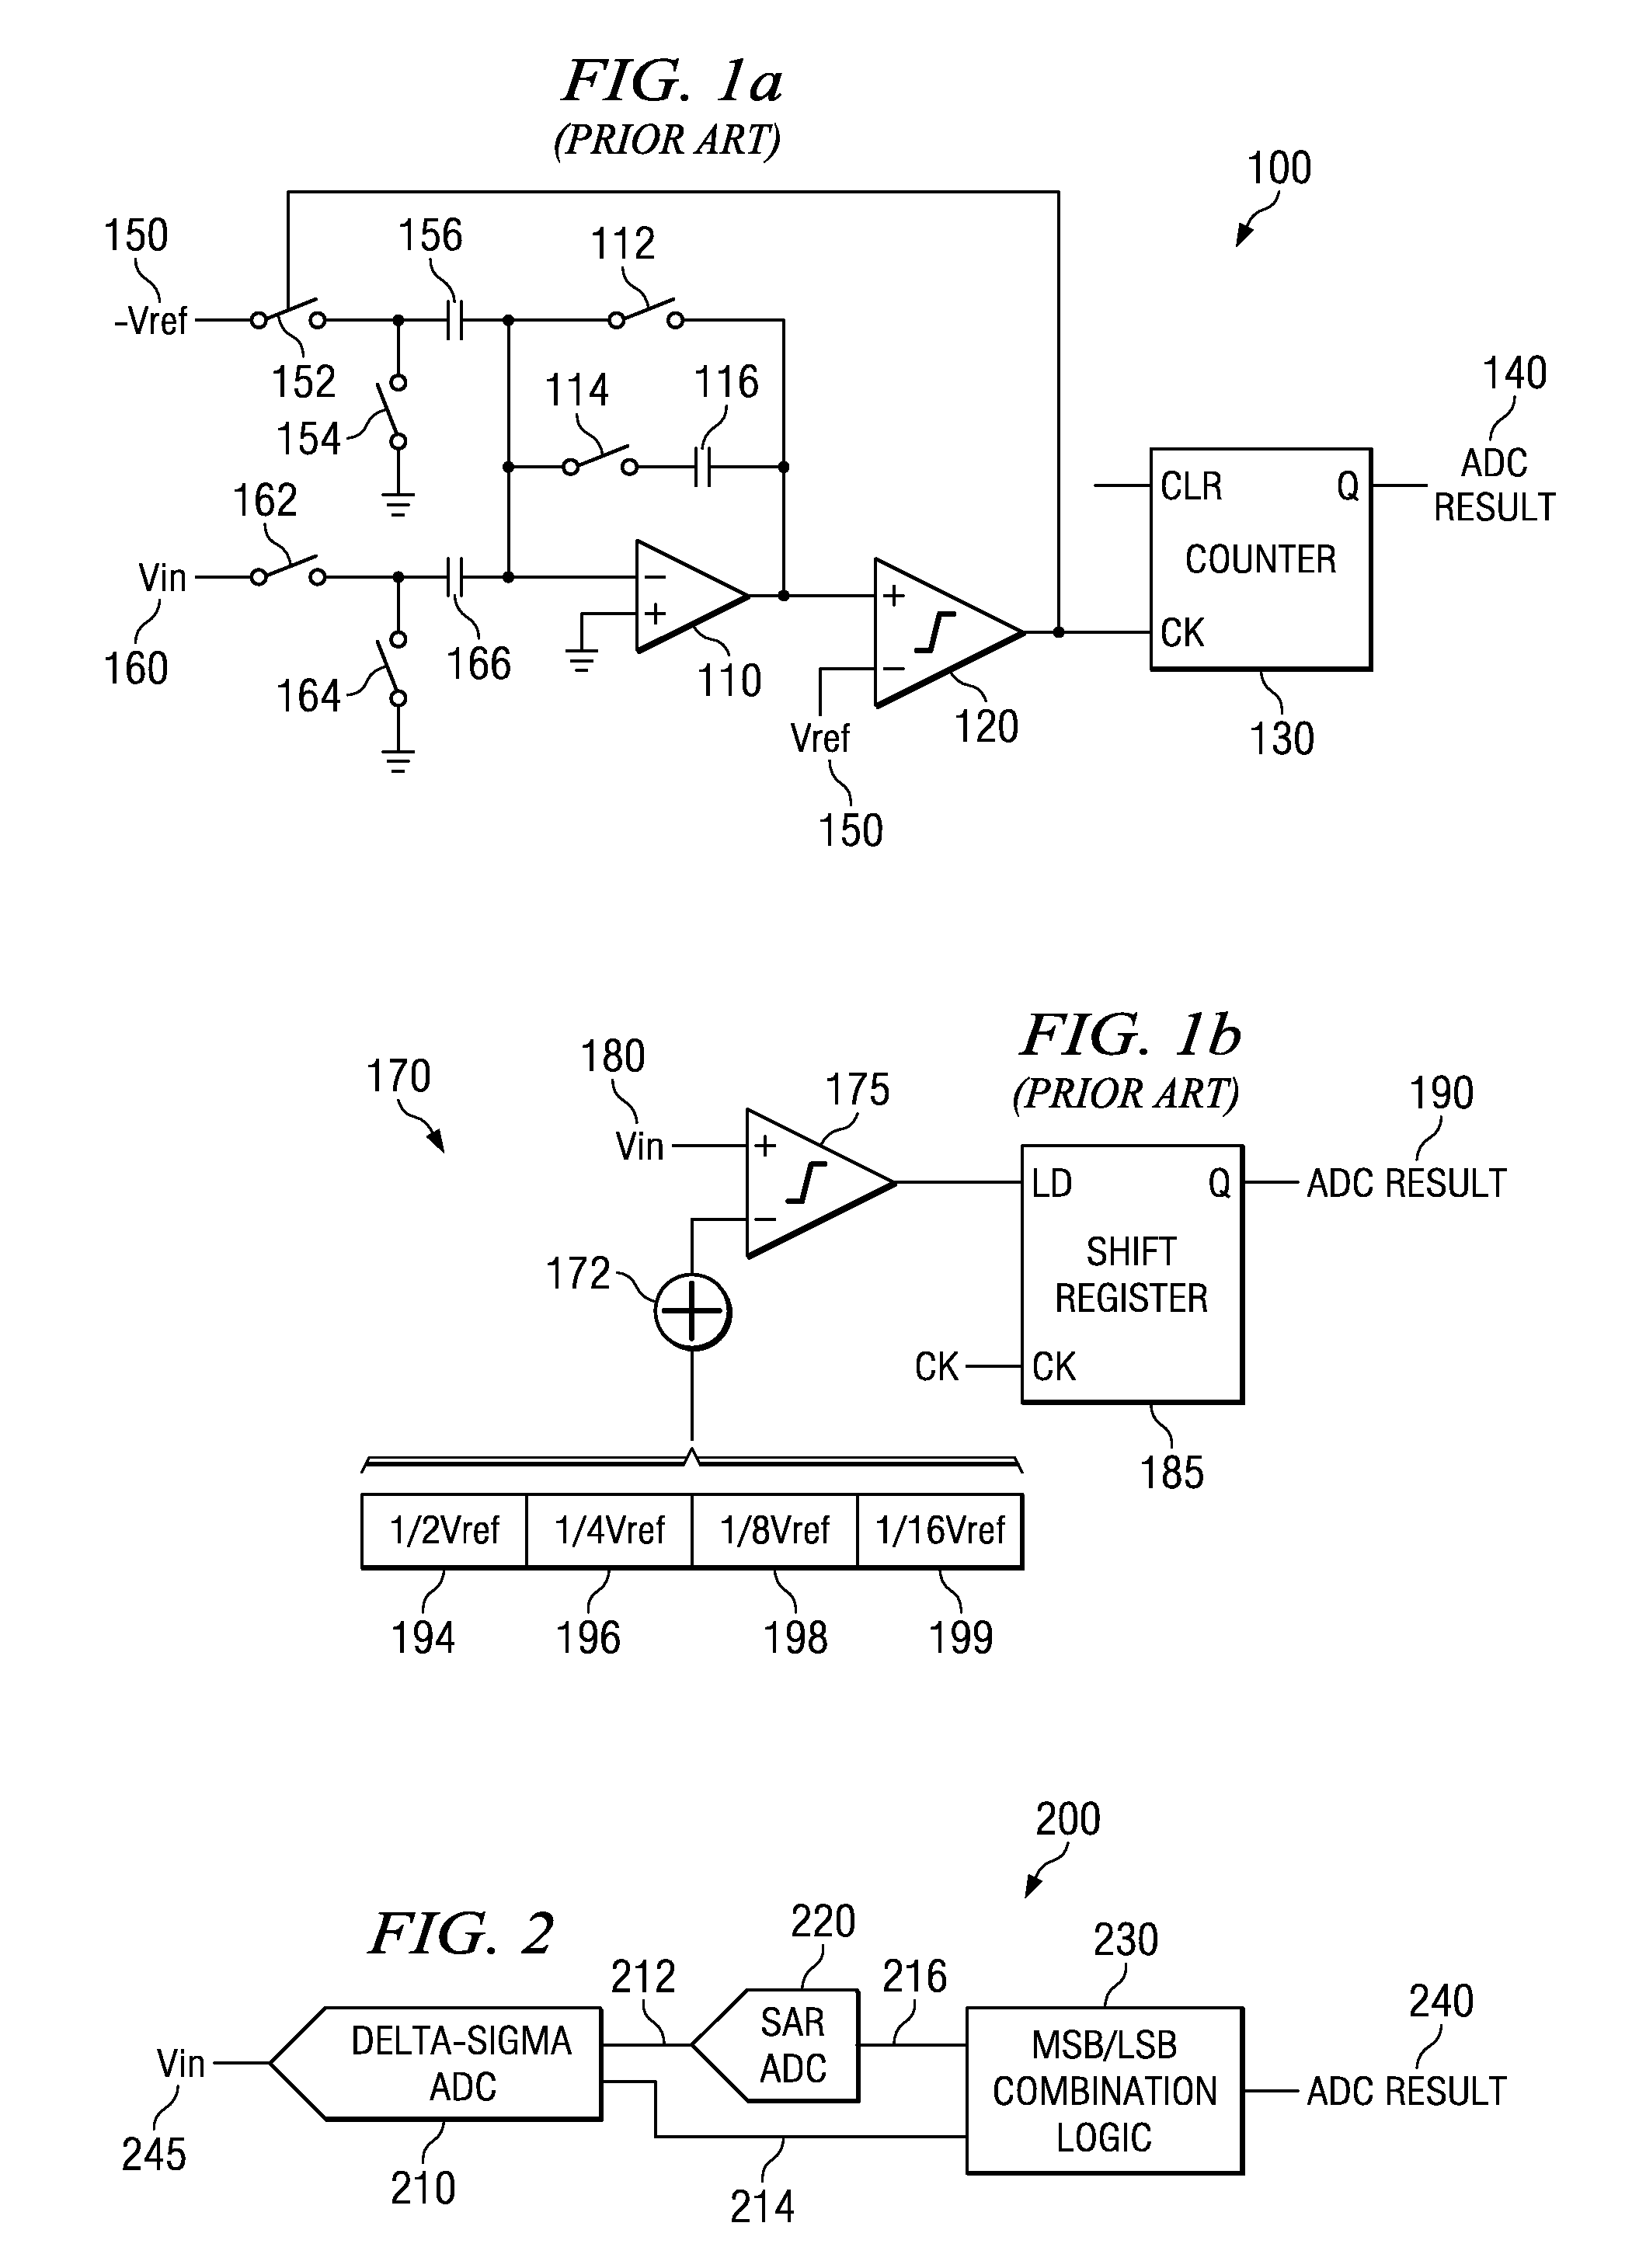 Hybrid delta-sigma/SAR analog to digital converter and methods for using such